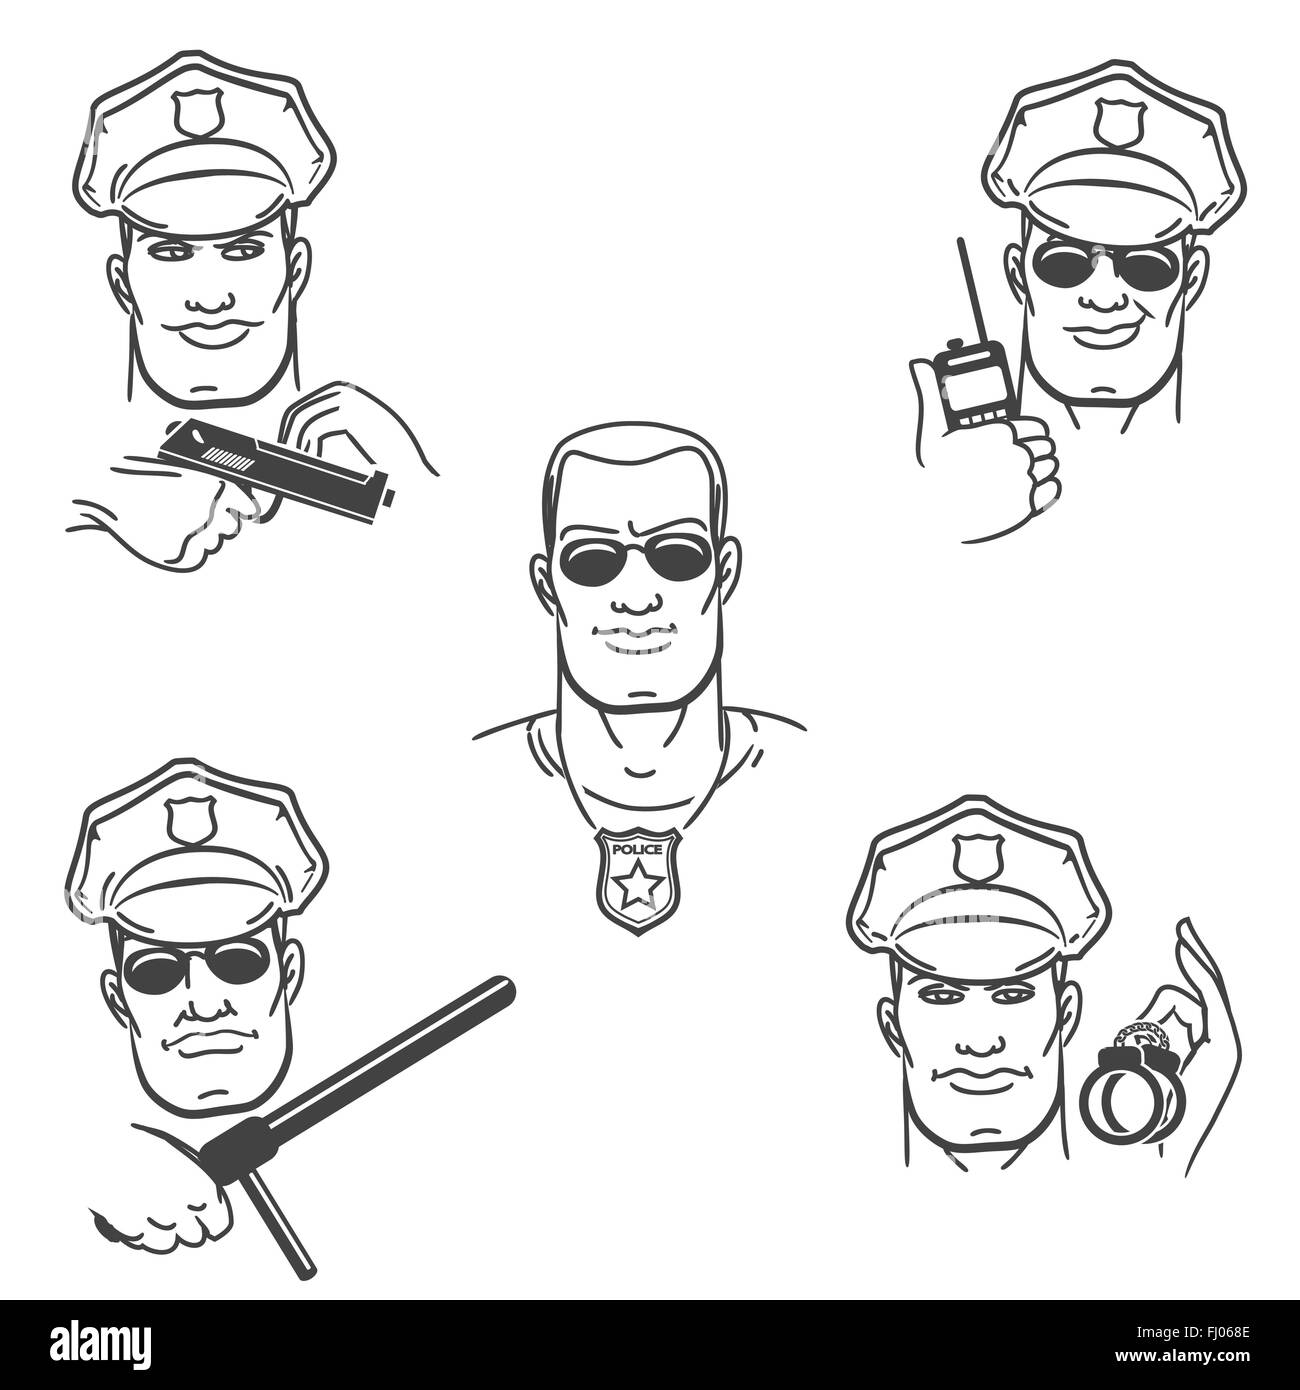 Police officer in various situations. Policemen face expression set drawn in thin line style. Stock Vector